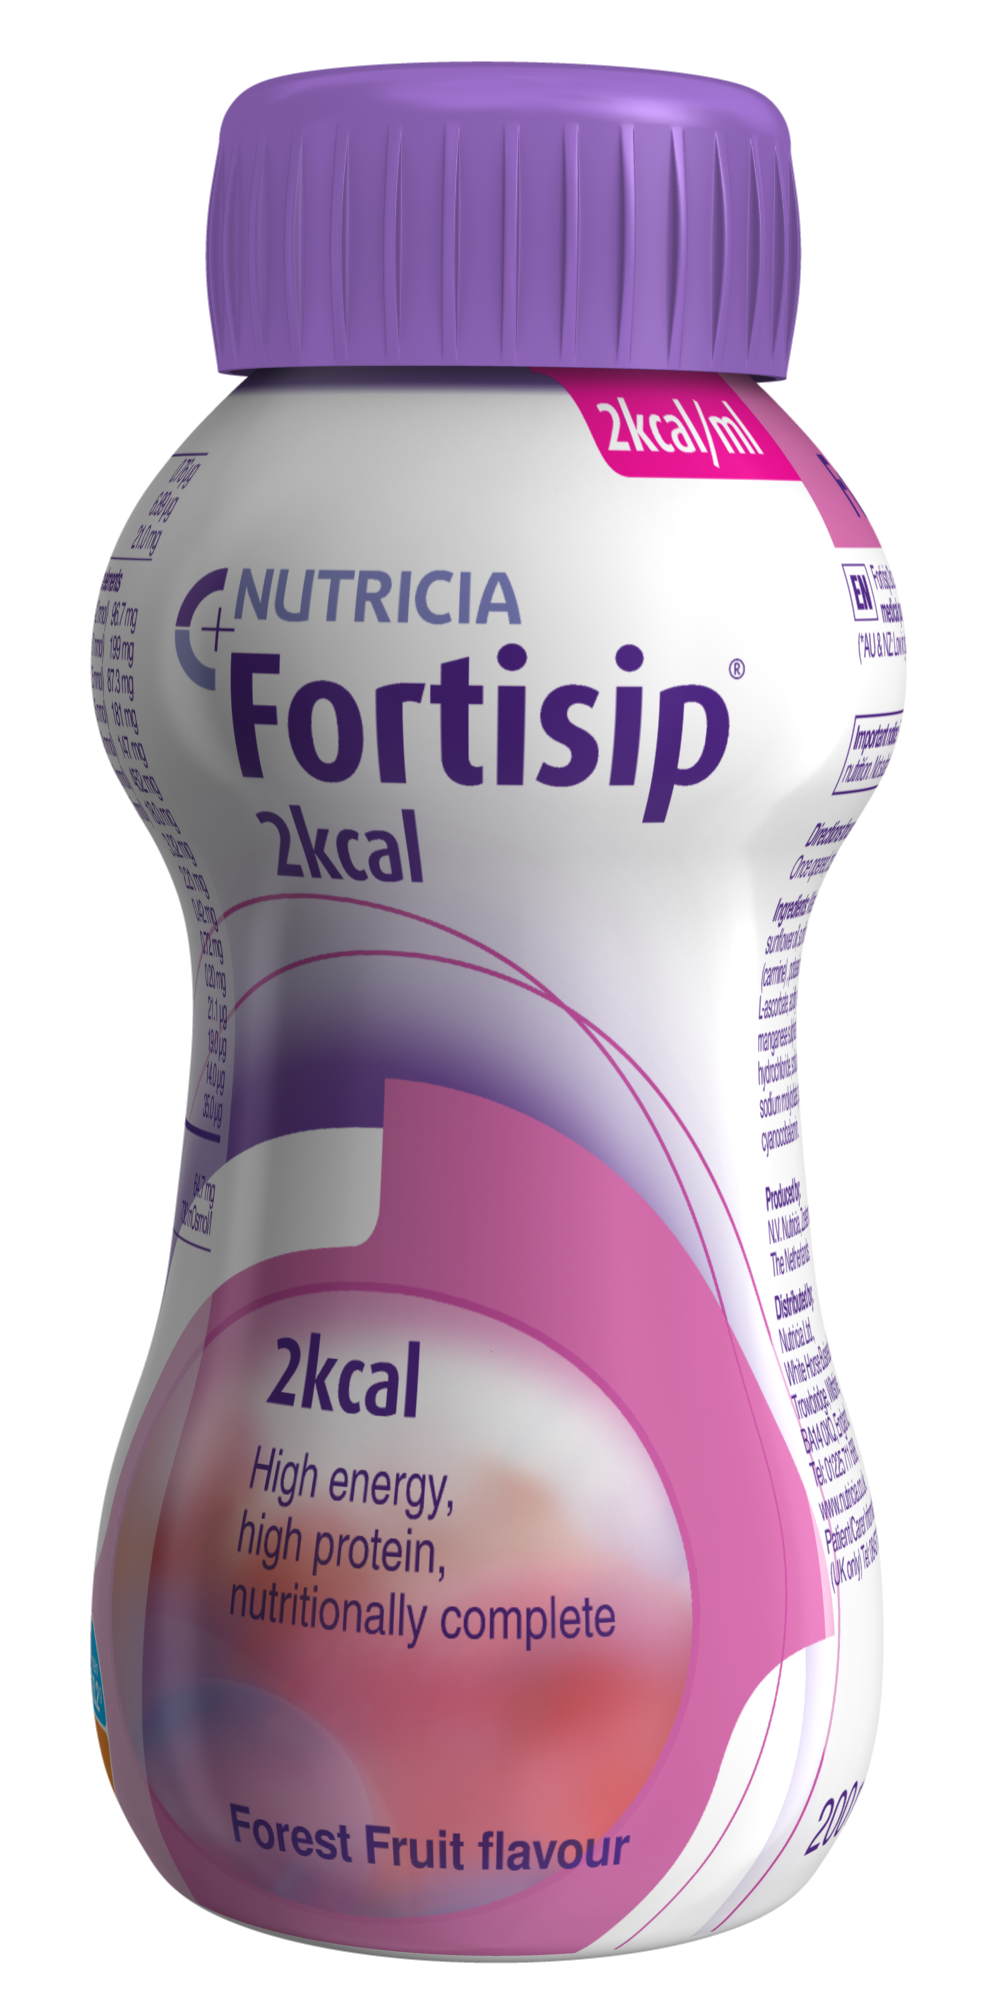 Fortisip 2kcal